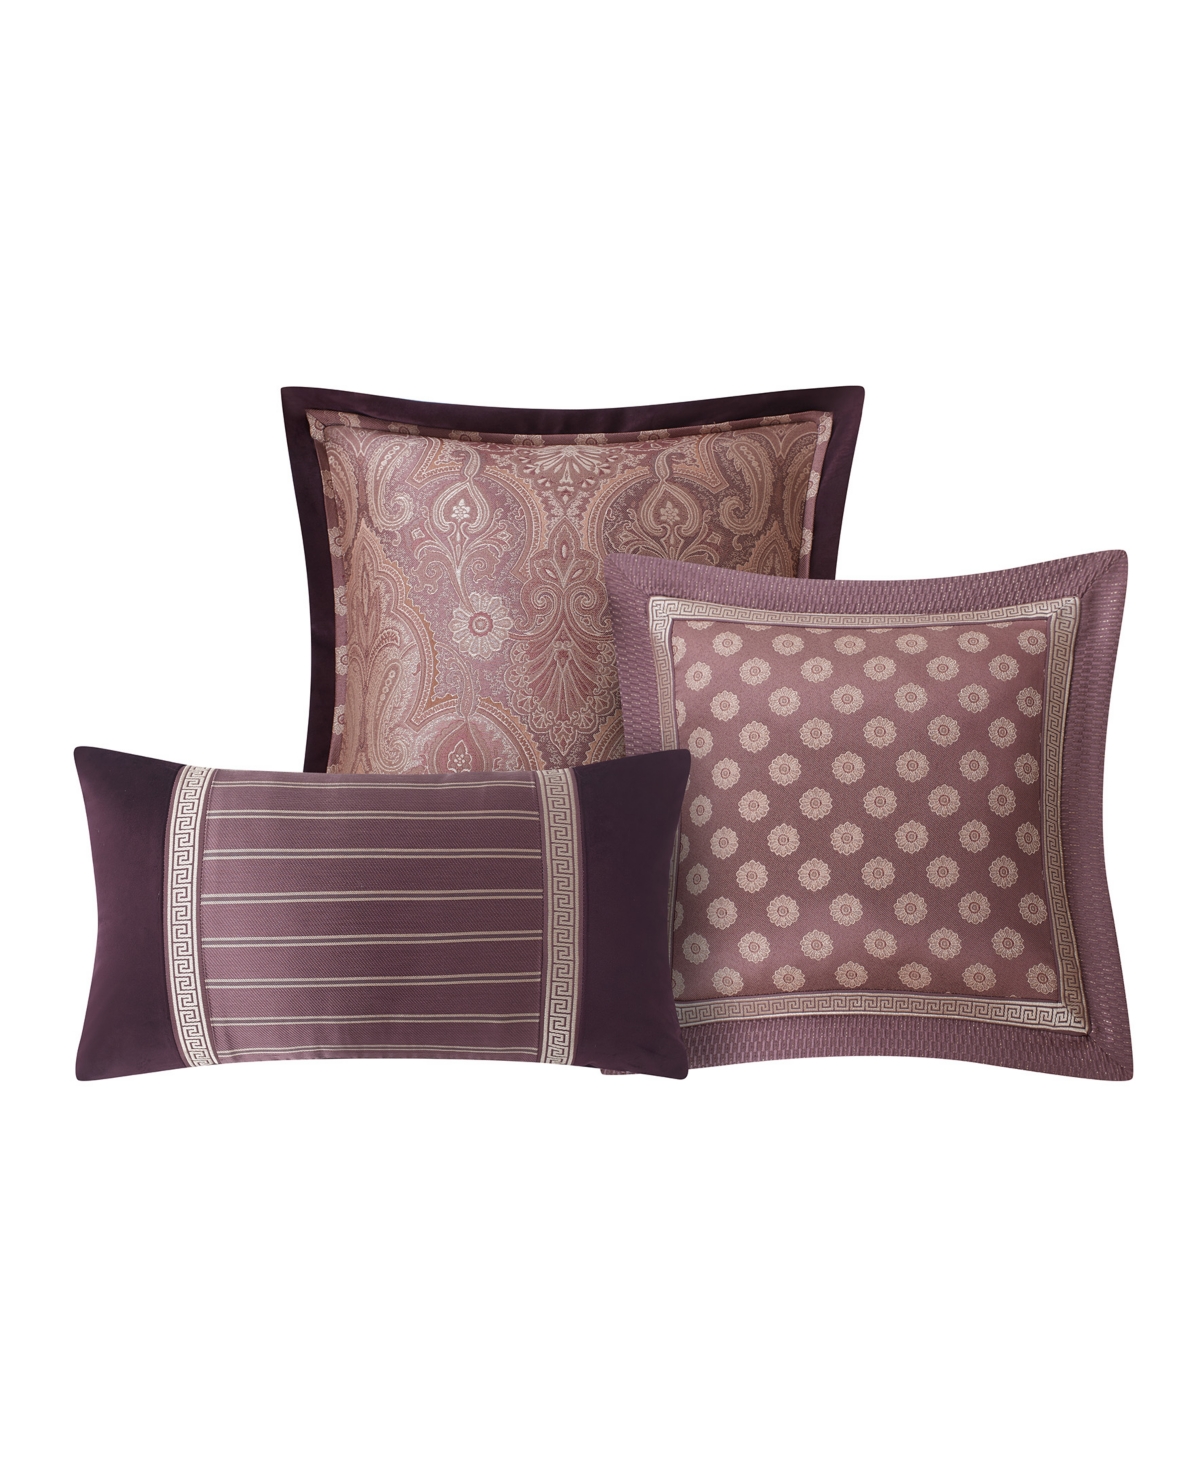 Waterford Set Of 3 Tabriz Decorative Pillows In Mulberry,wine